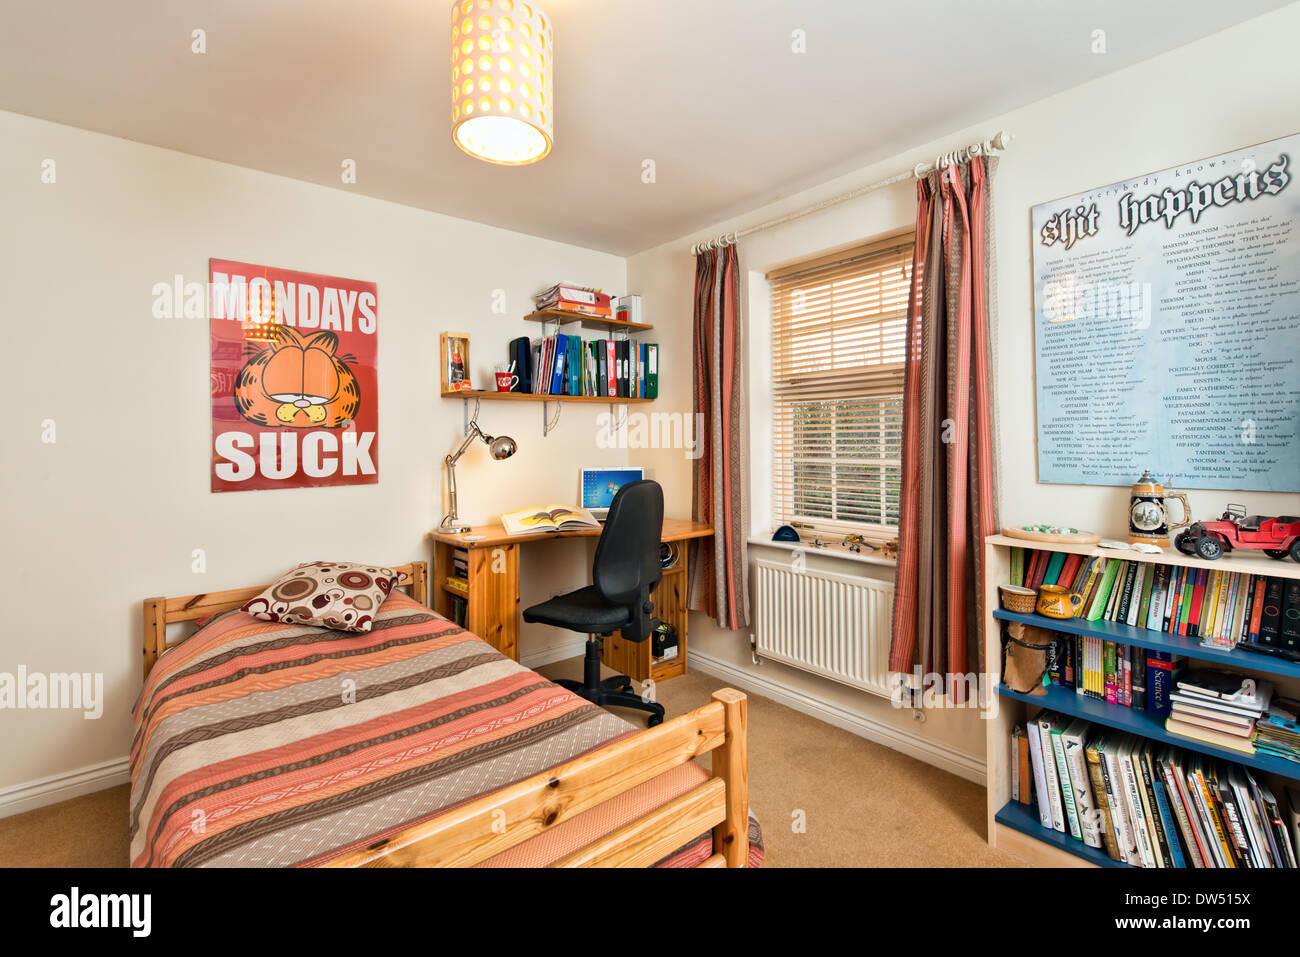 A typical teenage student bedroom or dorm accommodation with bed, books, desk & laptop computer Stock Photo